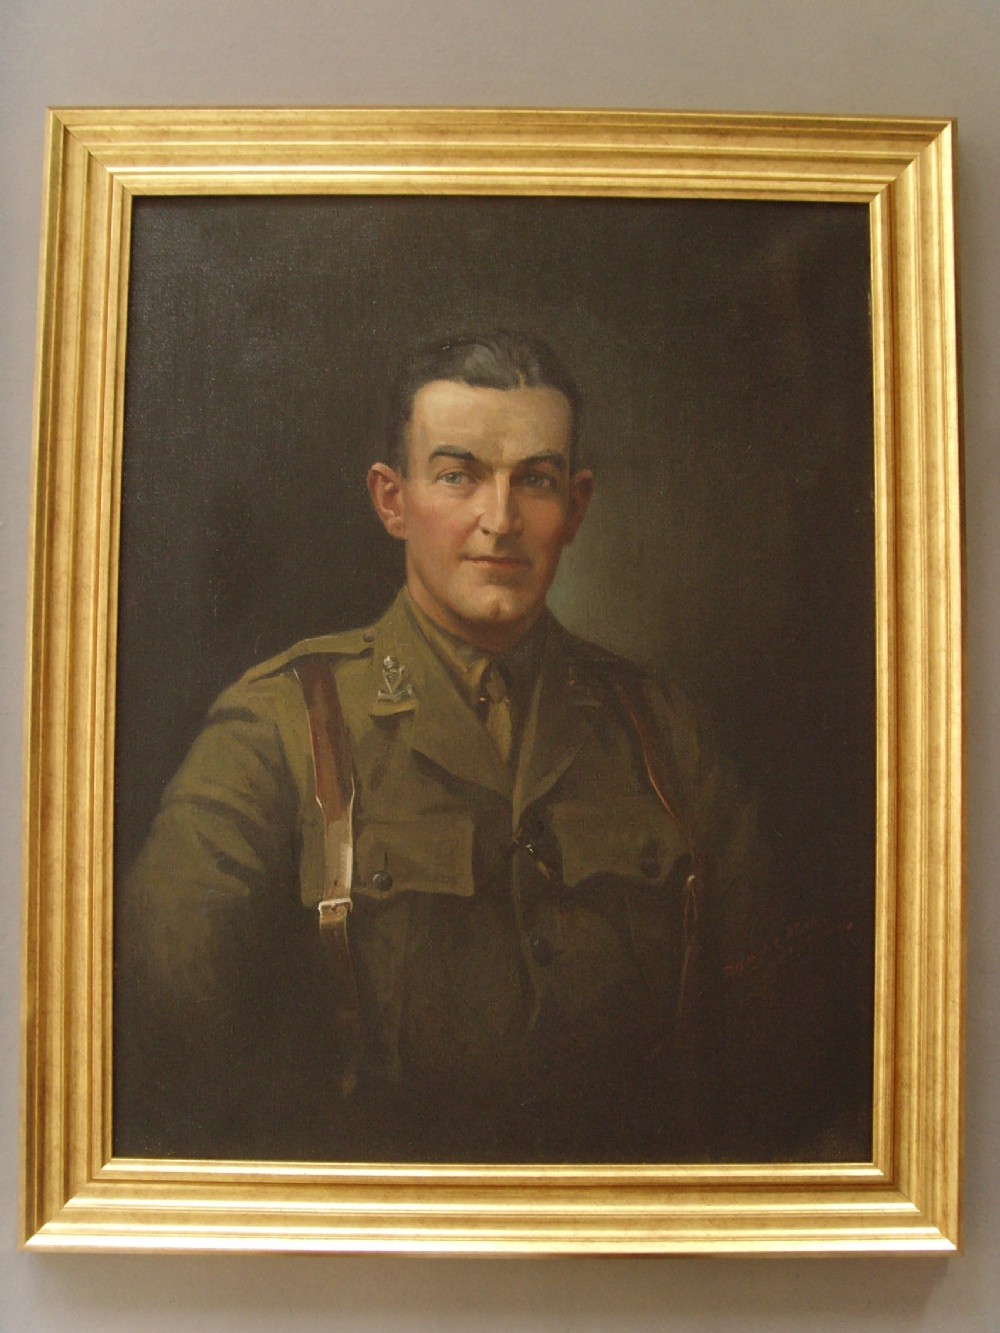 c1919 large military oil portrait painting army officer signed dated by scottish artist david nicholson ingles framed size 43 x 35 inches